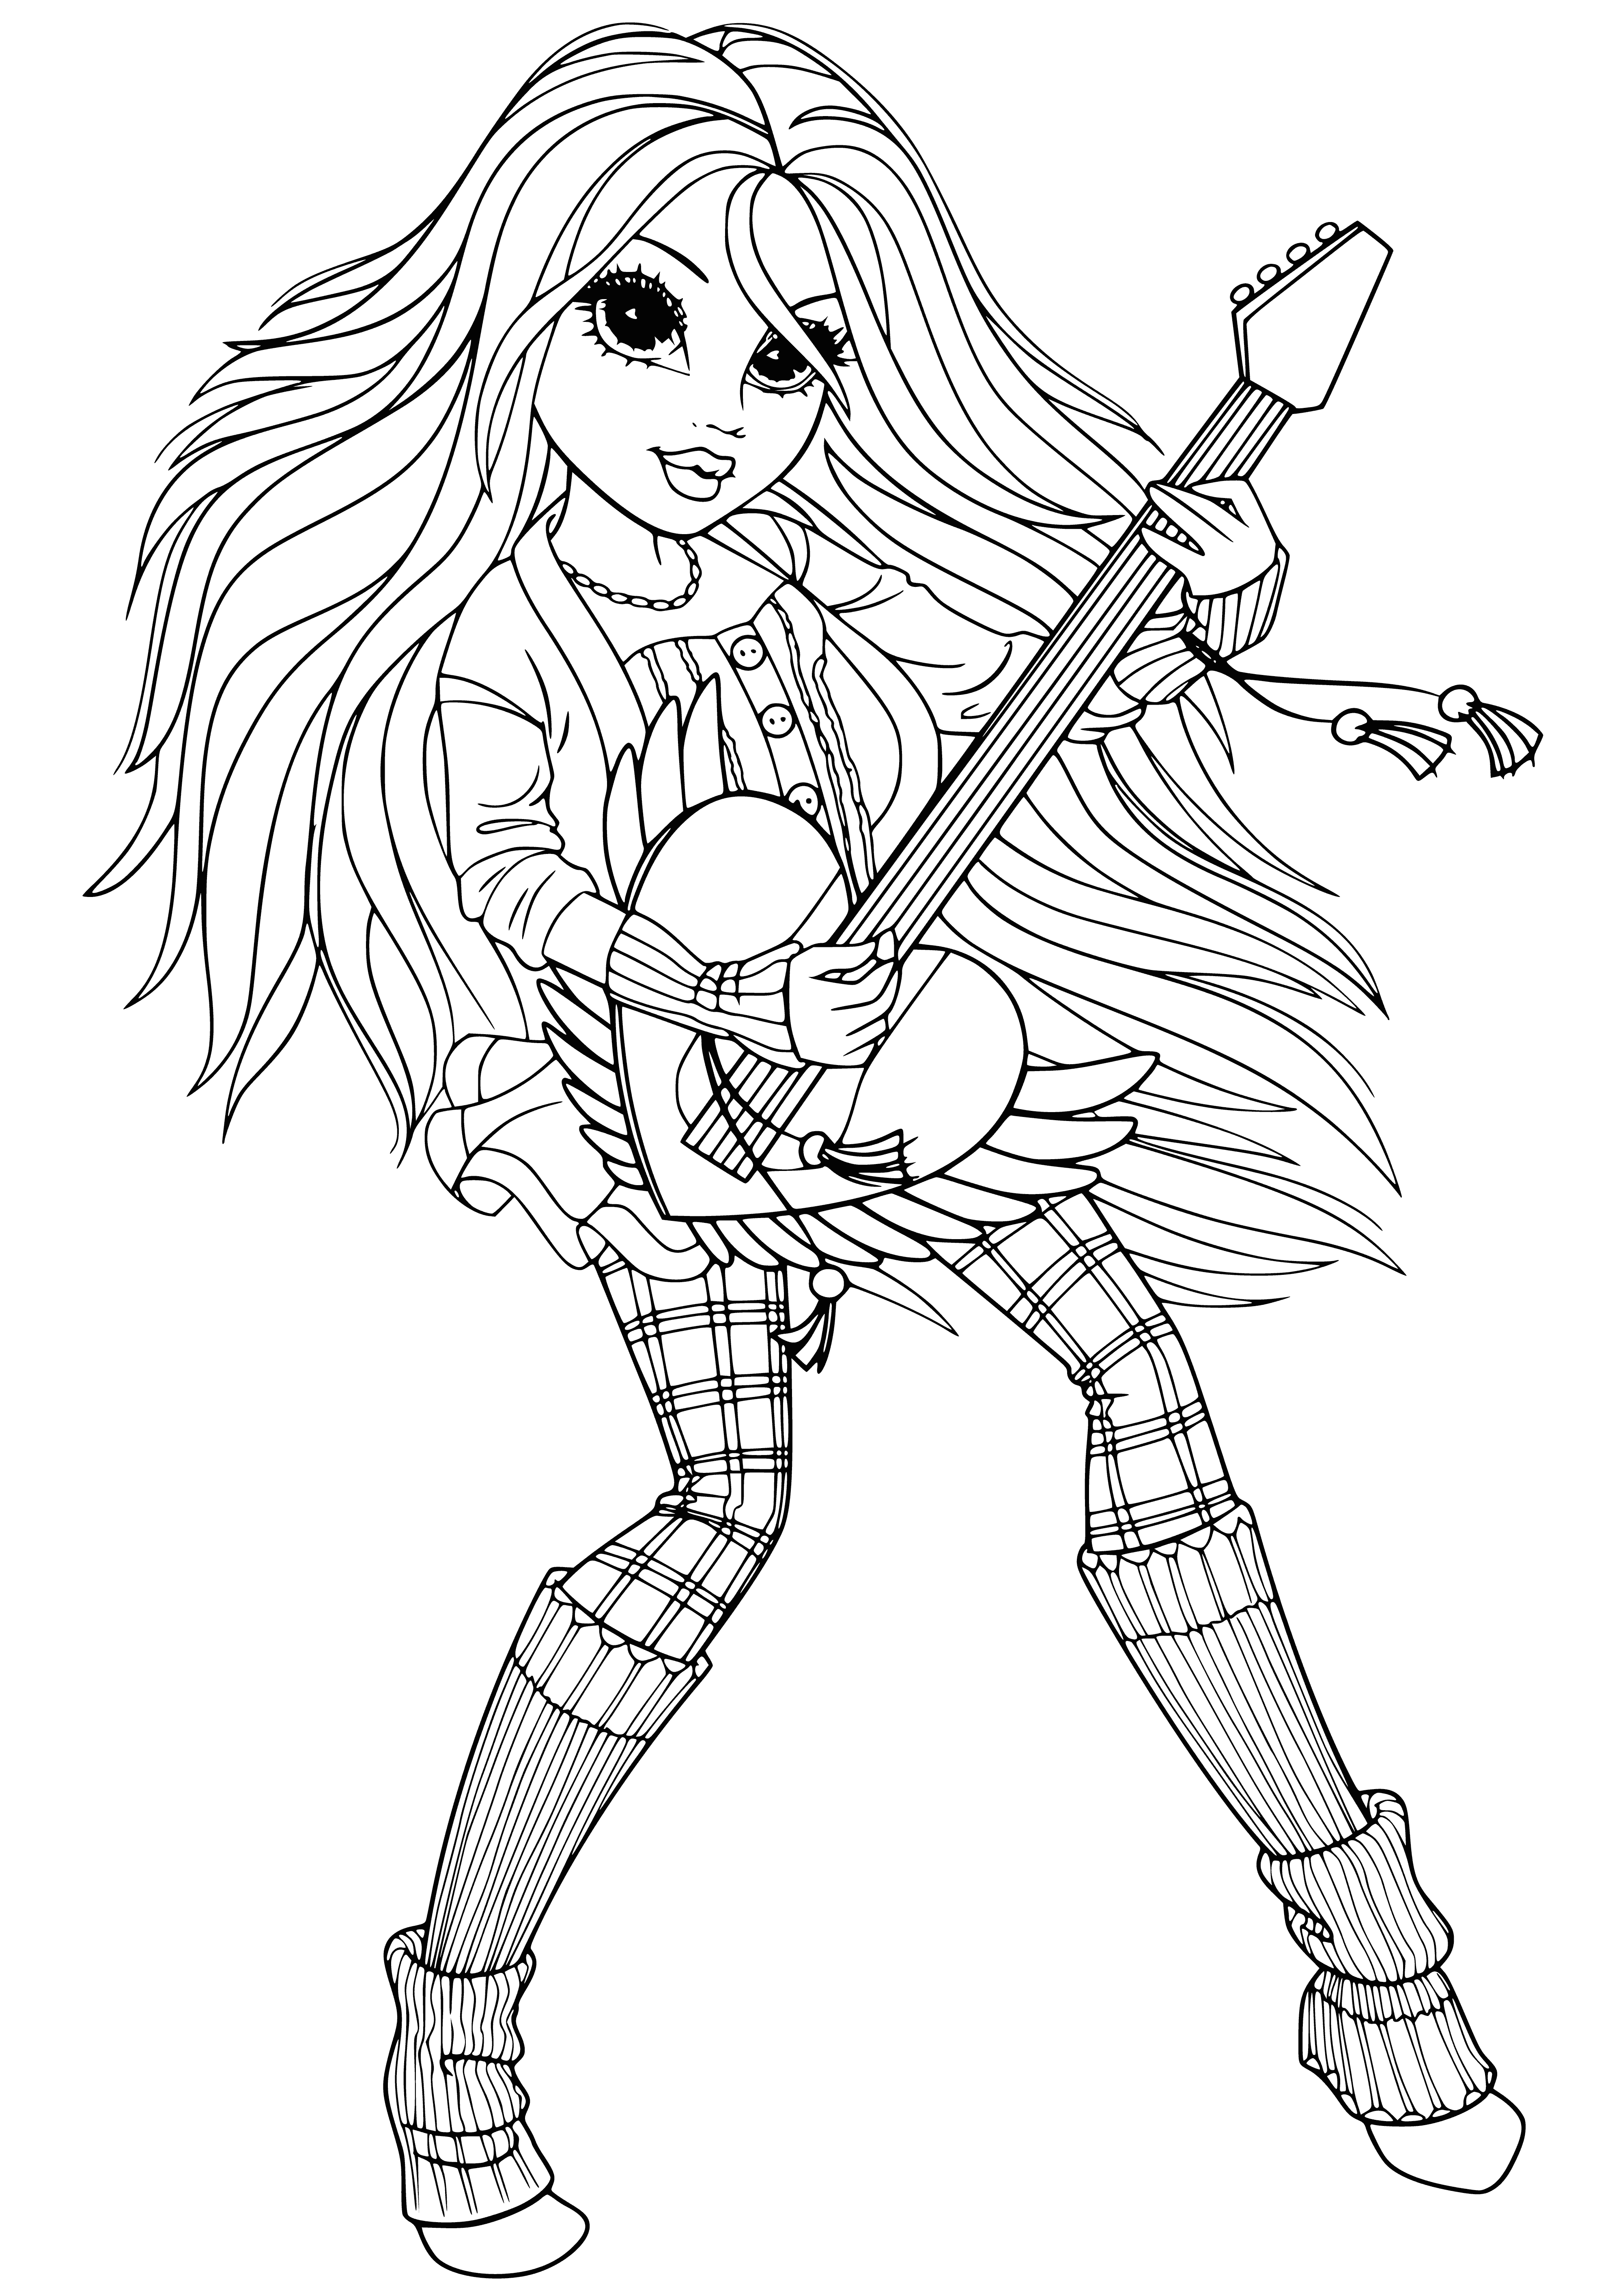 coloring page: Avery is a stylish girl wearing pink, stripes, and checkered patterns. She accessorizes with a black belt and silver buckle. #fashionista